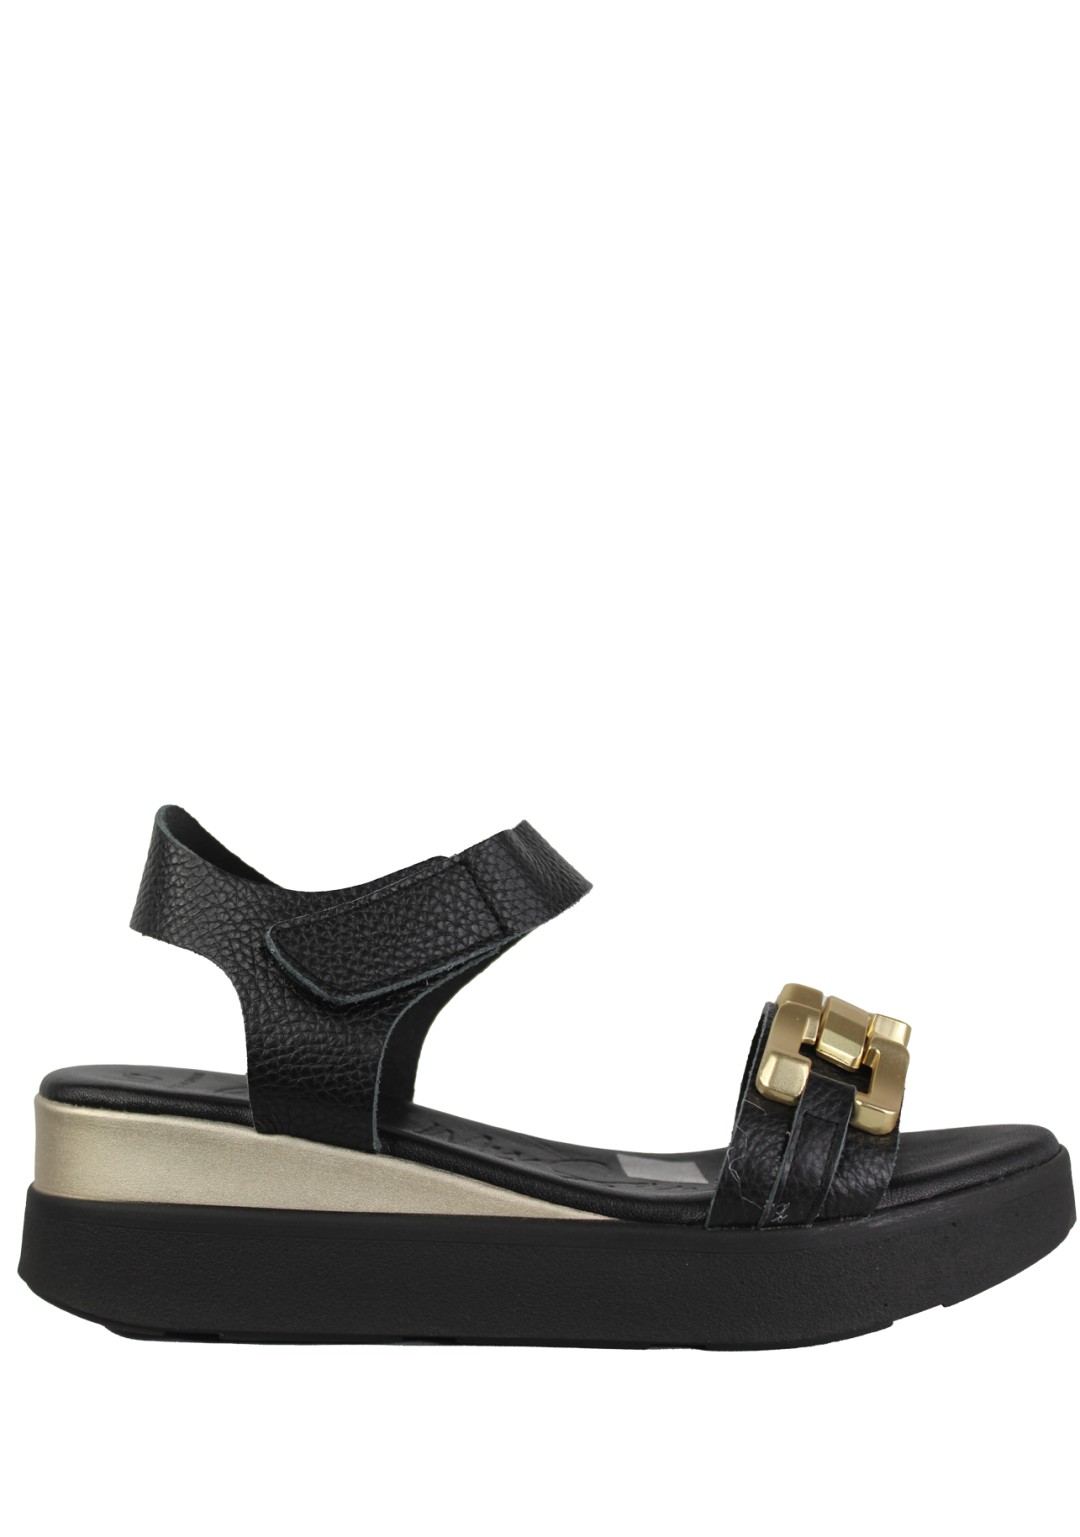 Oh! My Sandals - Sandalo Catena - Donna - 5419